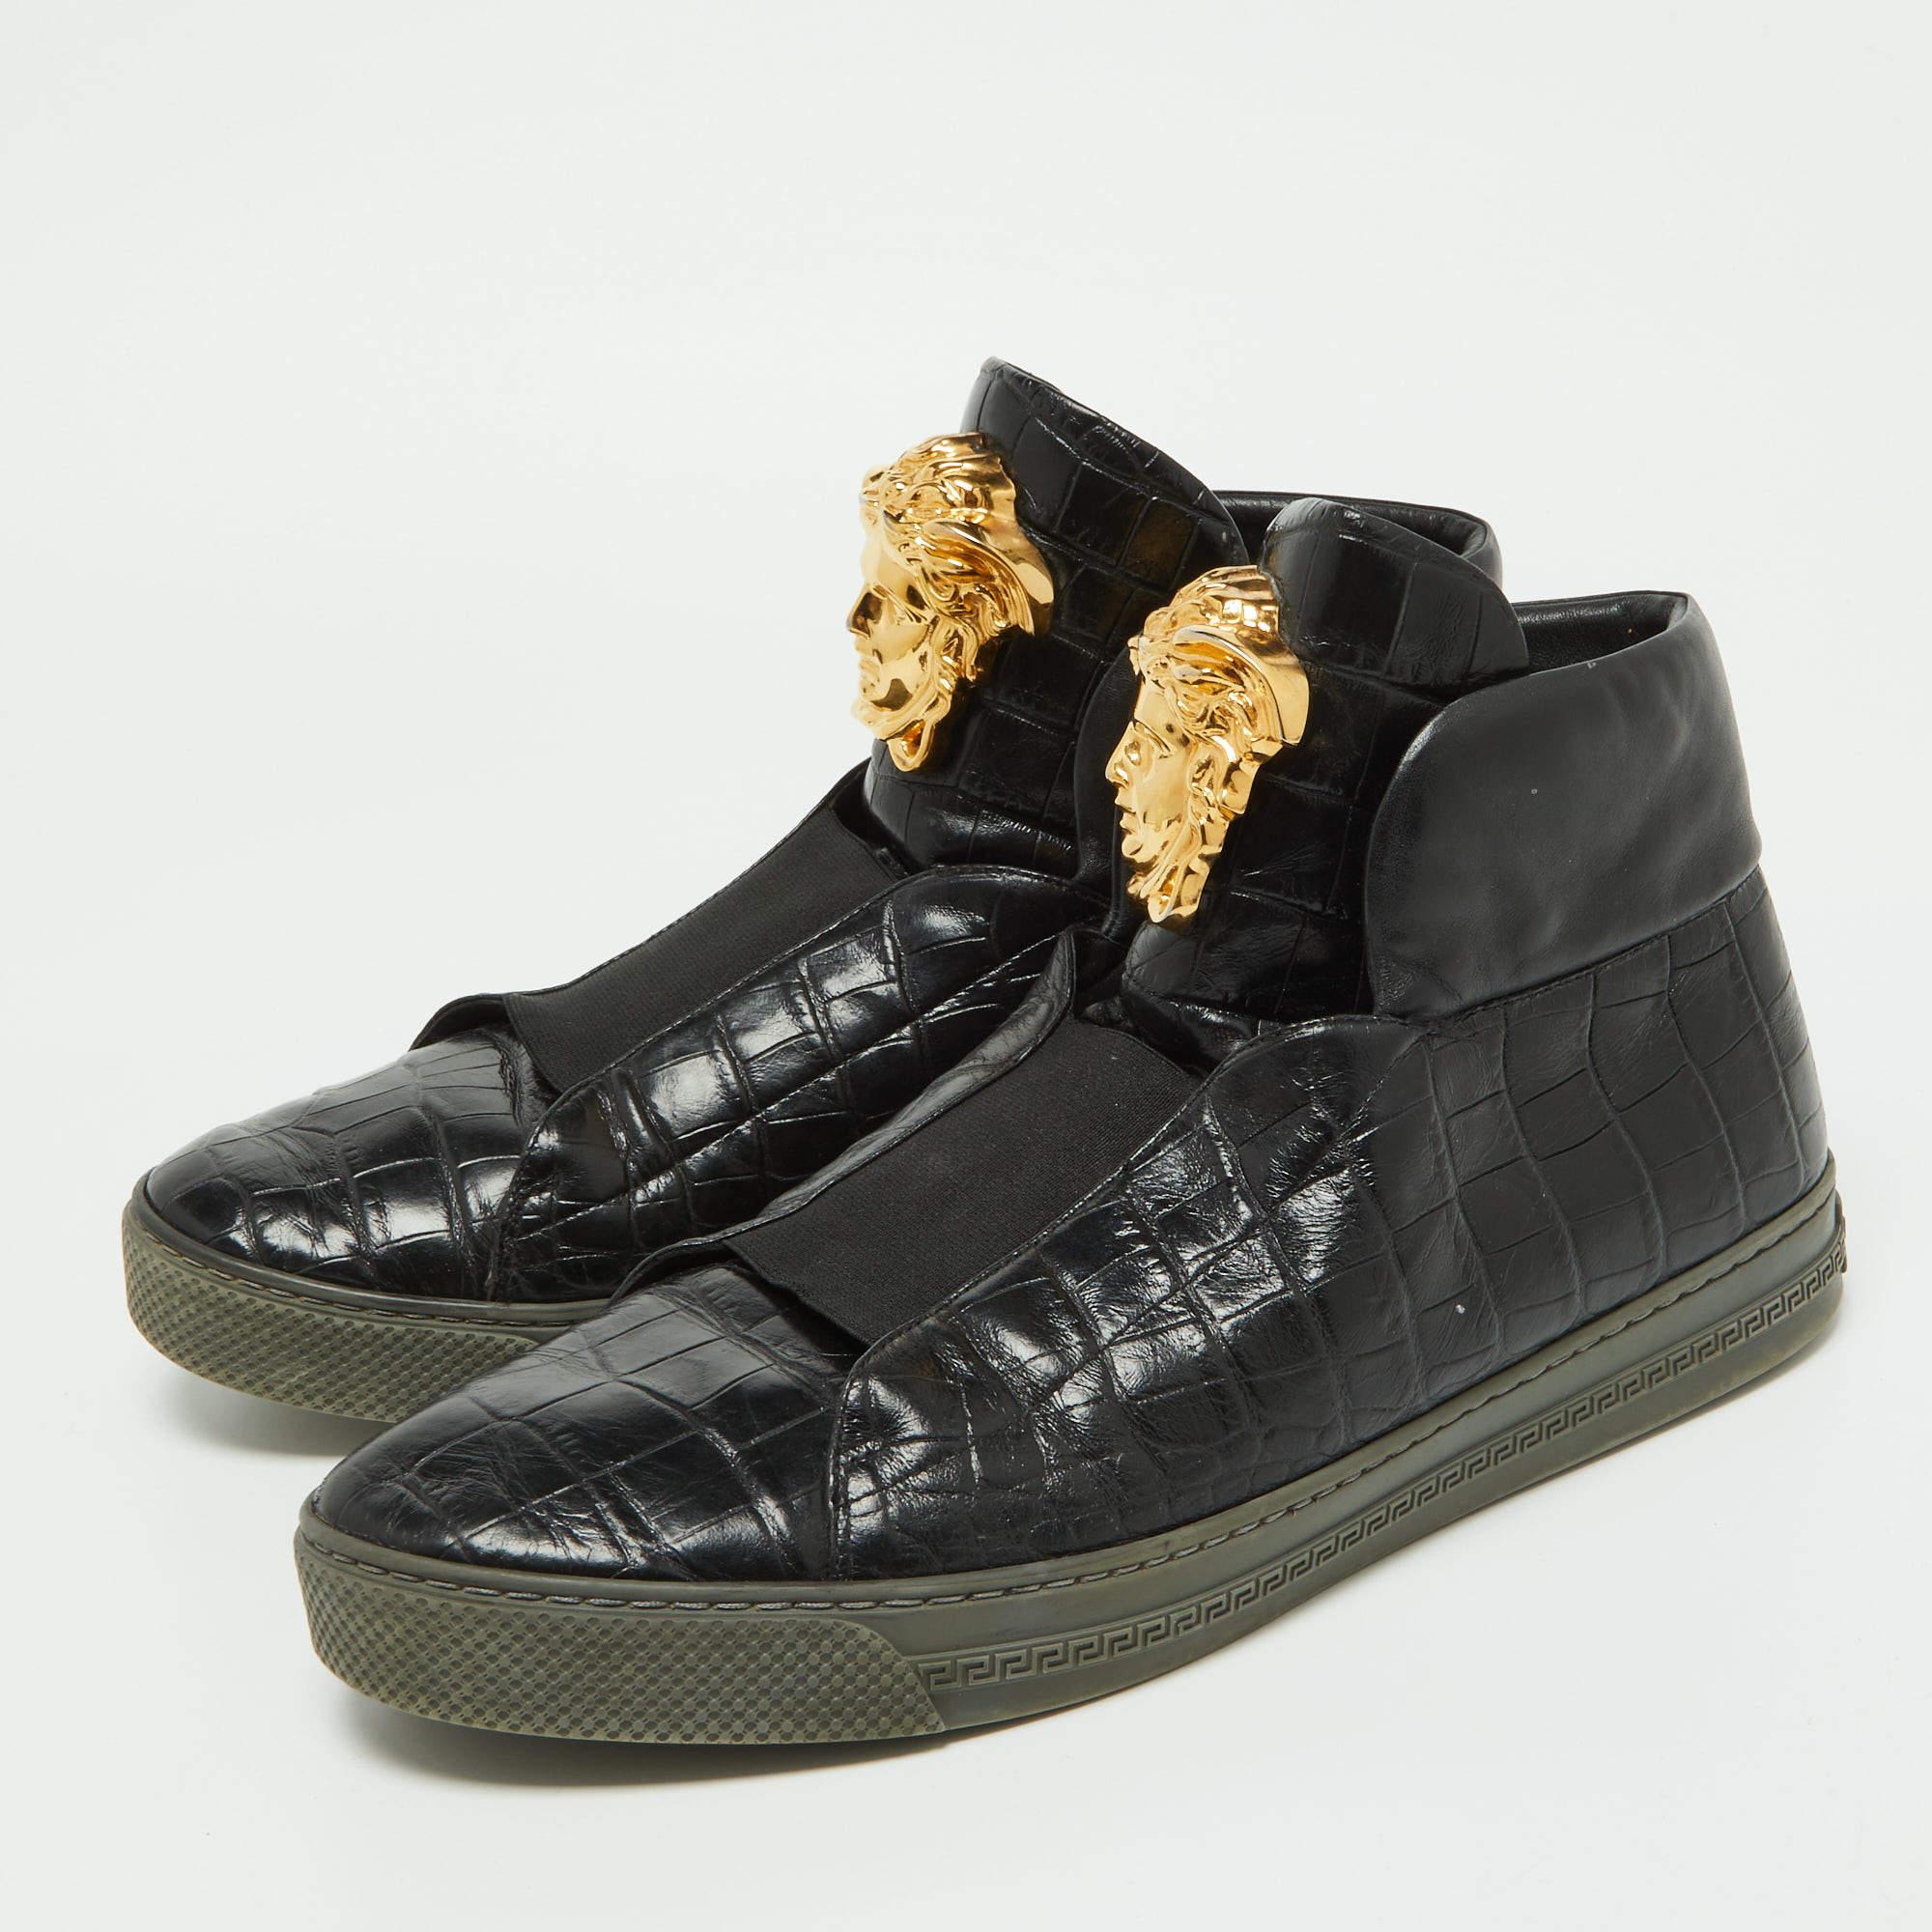 Brimming with fabulous details, these Versace sneakers are crafted from croc-embossed leather into a high-top silhouette and feature the Medusa logo. The fine construction and trendy appeal make these sneakers a must-buy.

